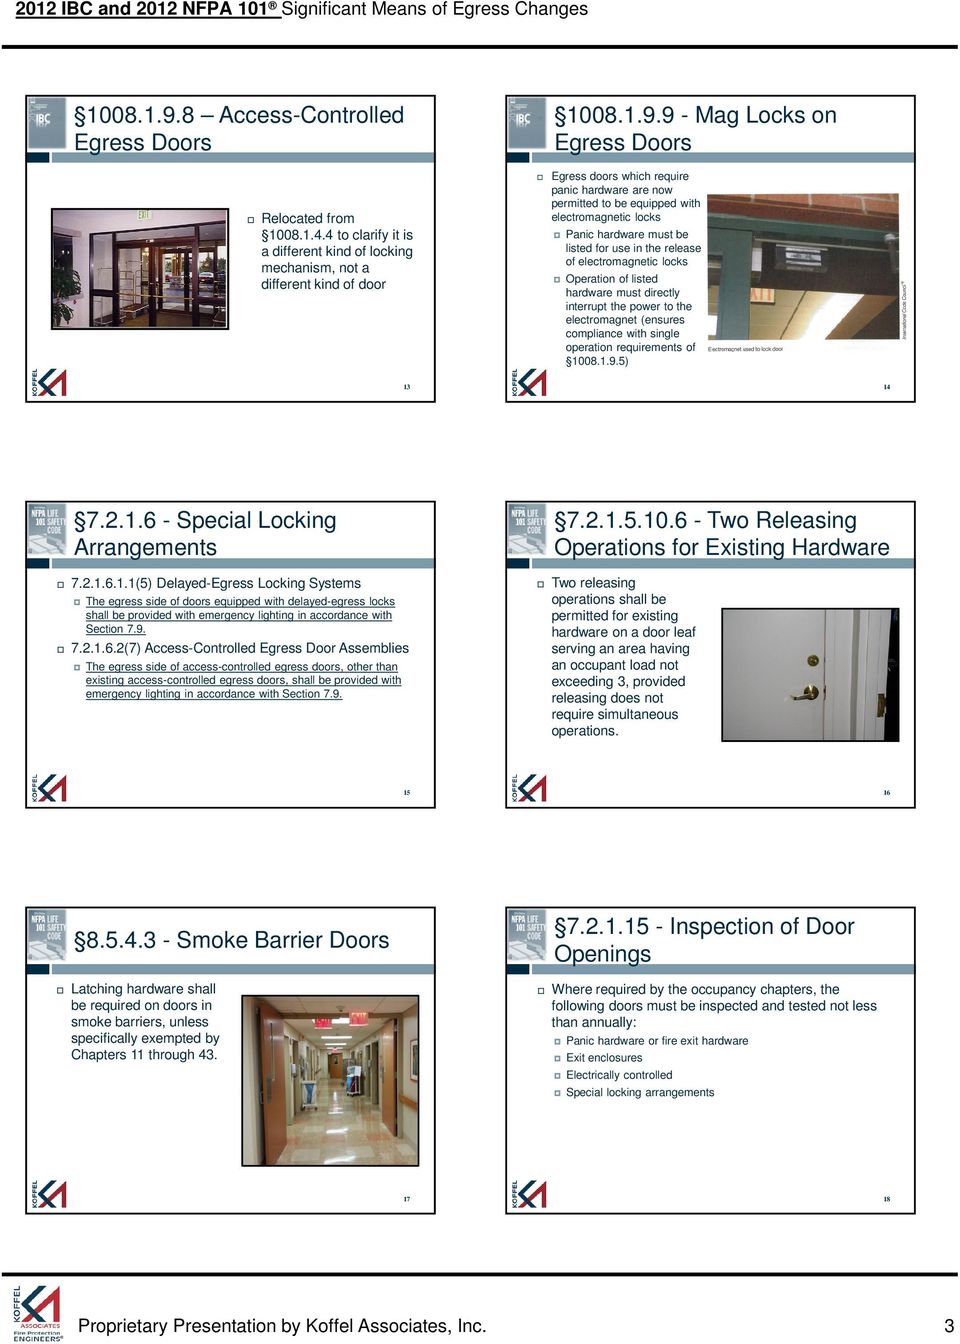 4 to clarify it is a different kind of locking mechanism, not a different kind of door 9 - Mag Locks on Egress Doors Egress doors which require panic hardware are now permitted to be equipped with